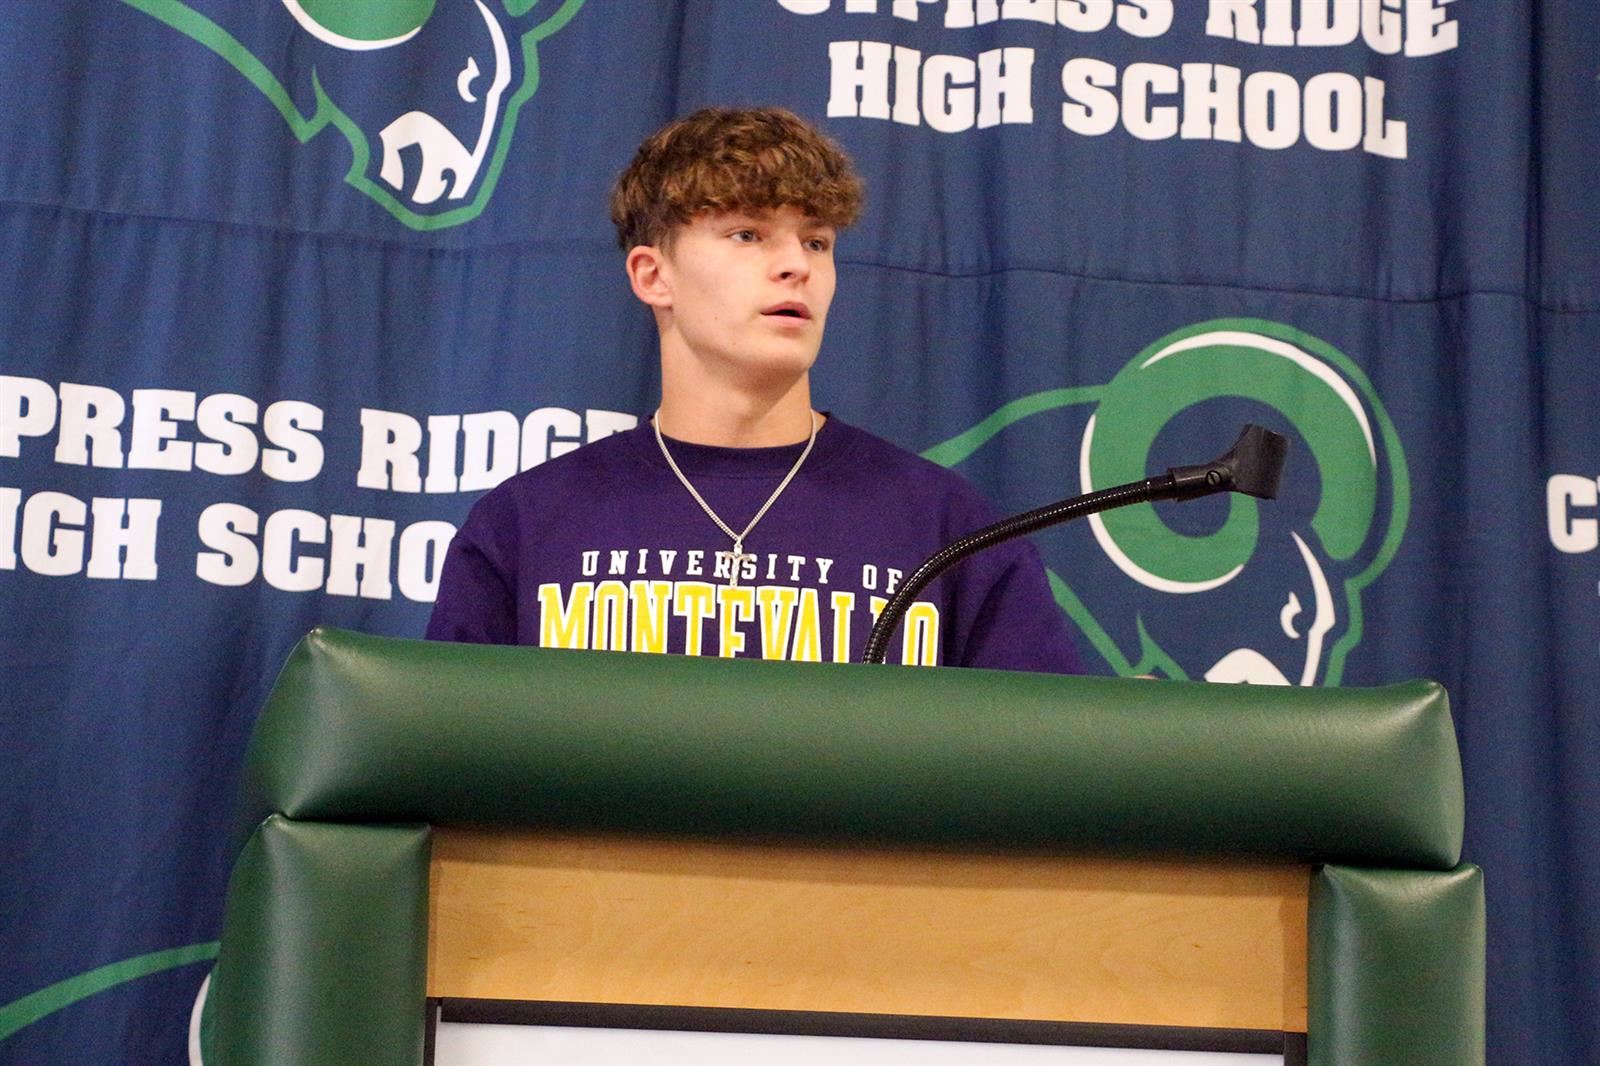 Cypress Ridge senior Jacob Harrison signed a letter of intent to play lacrosse at the University of Montevallo.